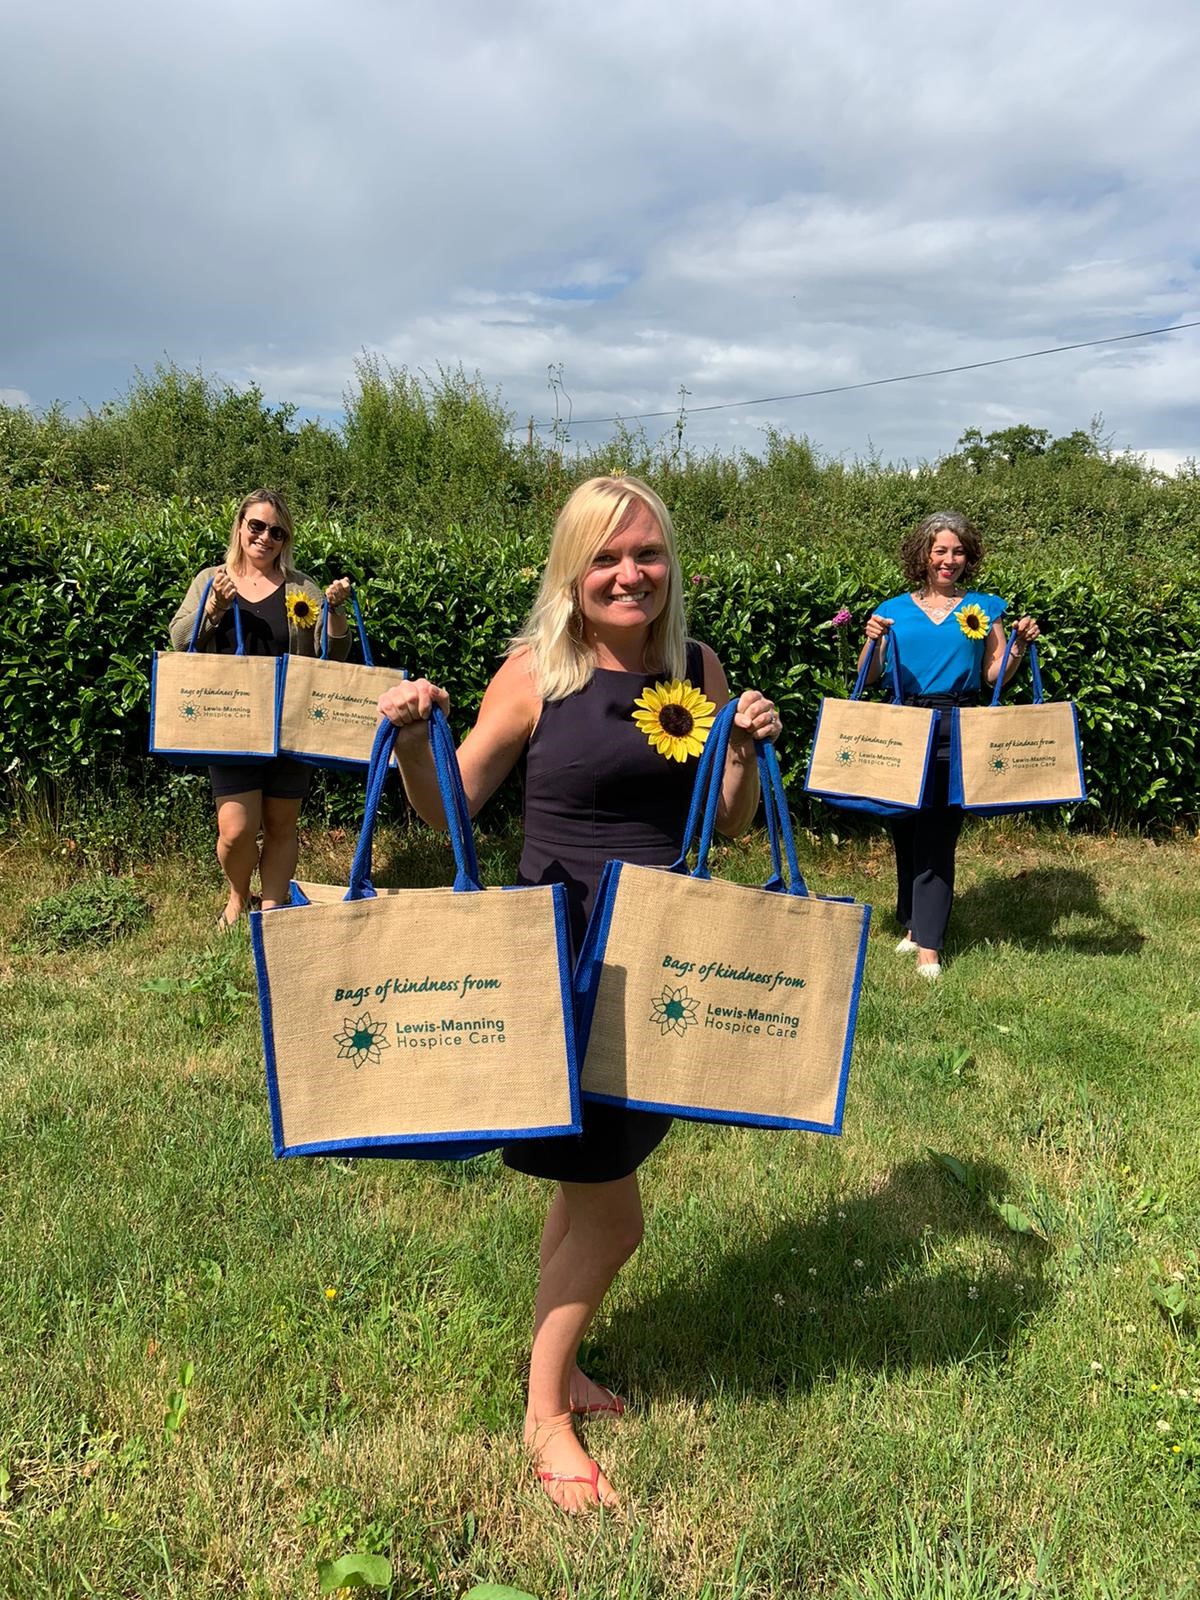 Lewis-Manning Hospice Care deliver ‘Bags of Kindness’ across East Dorset